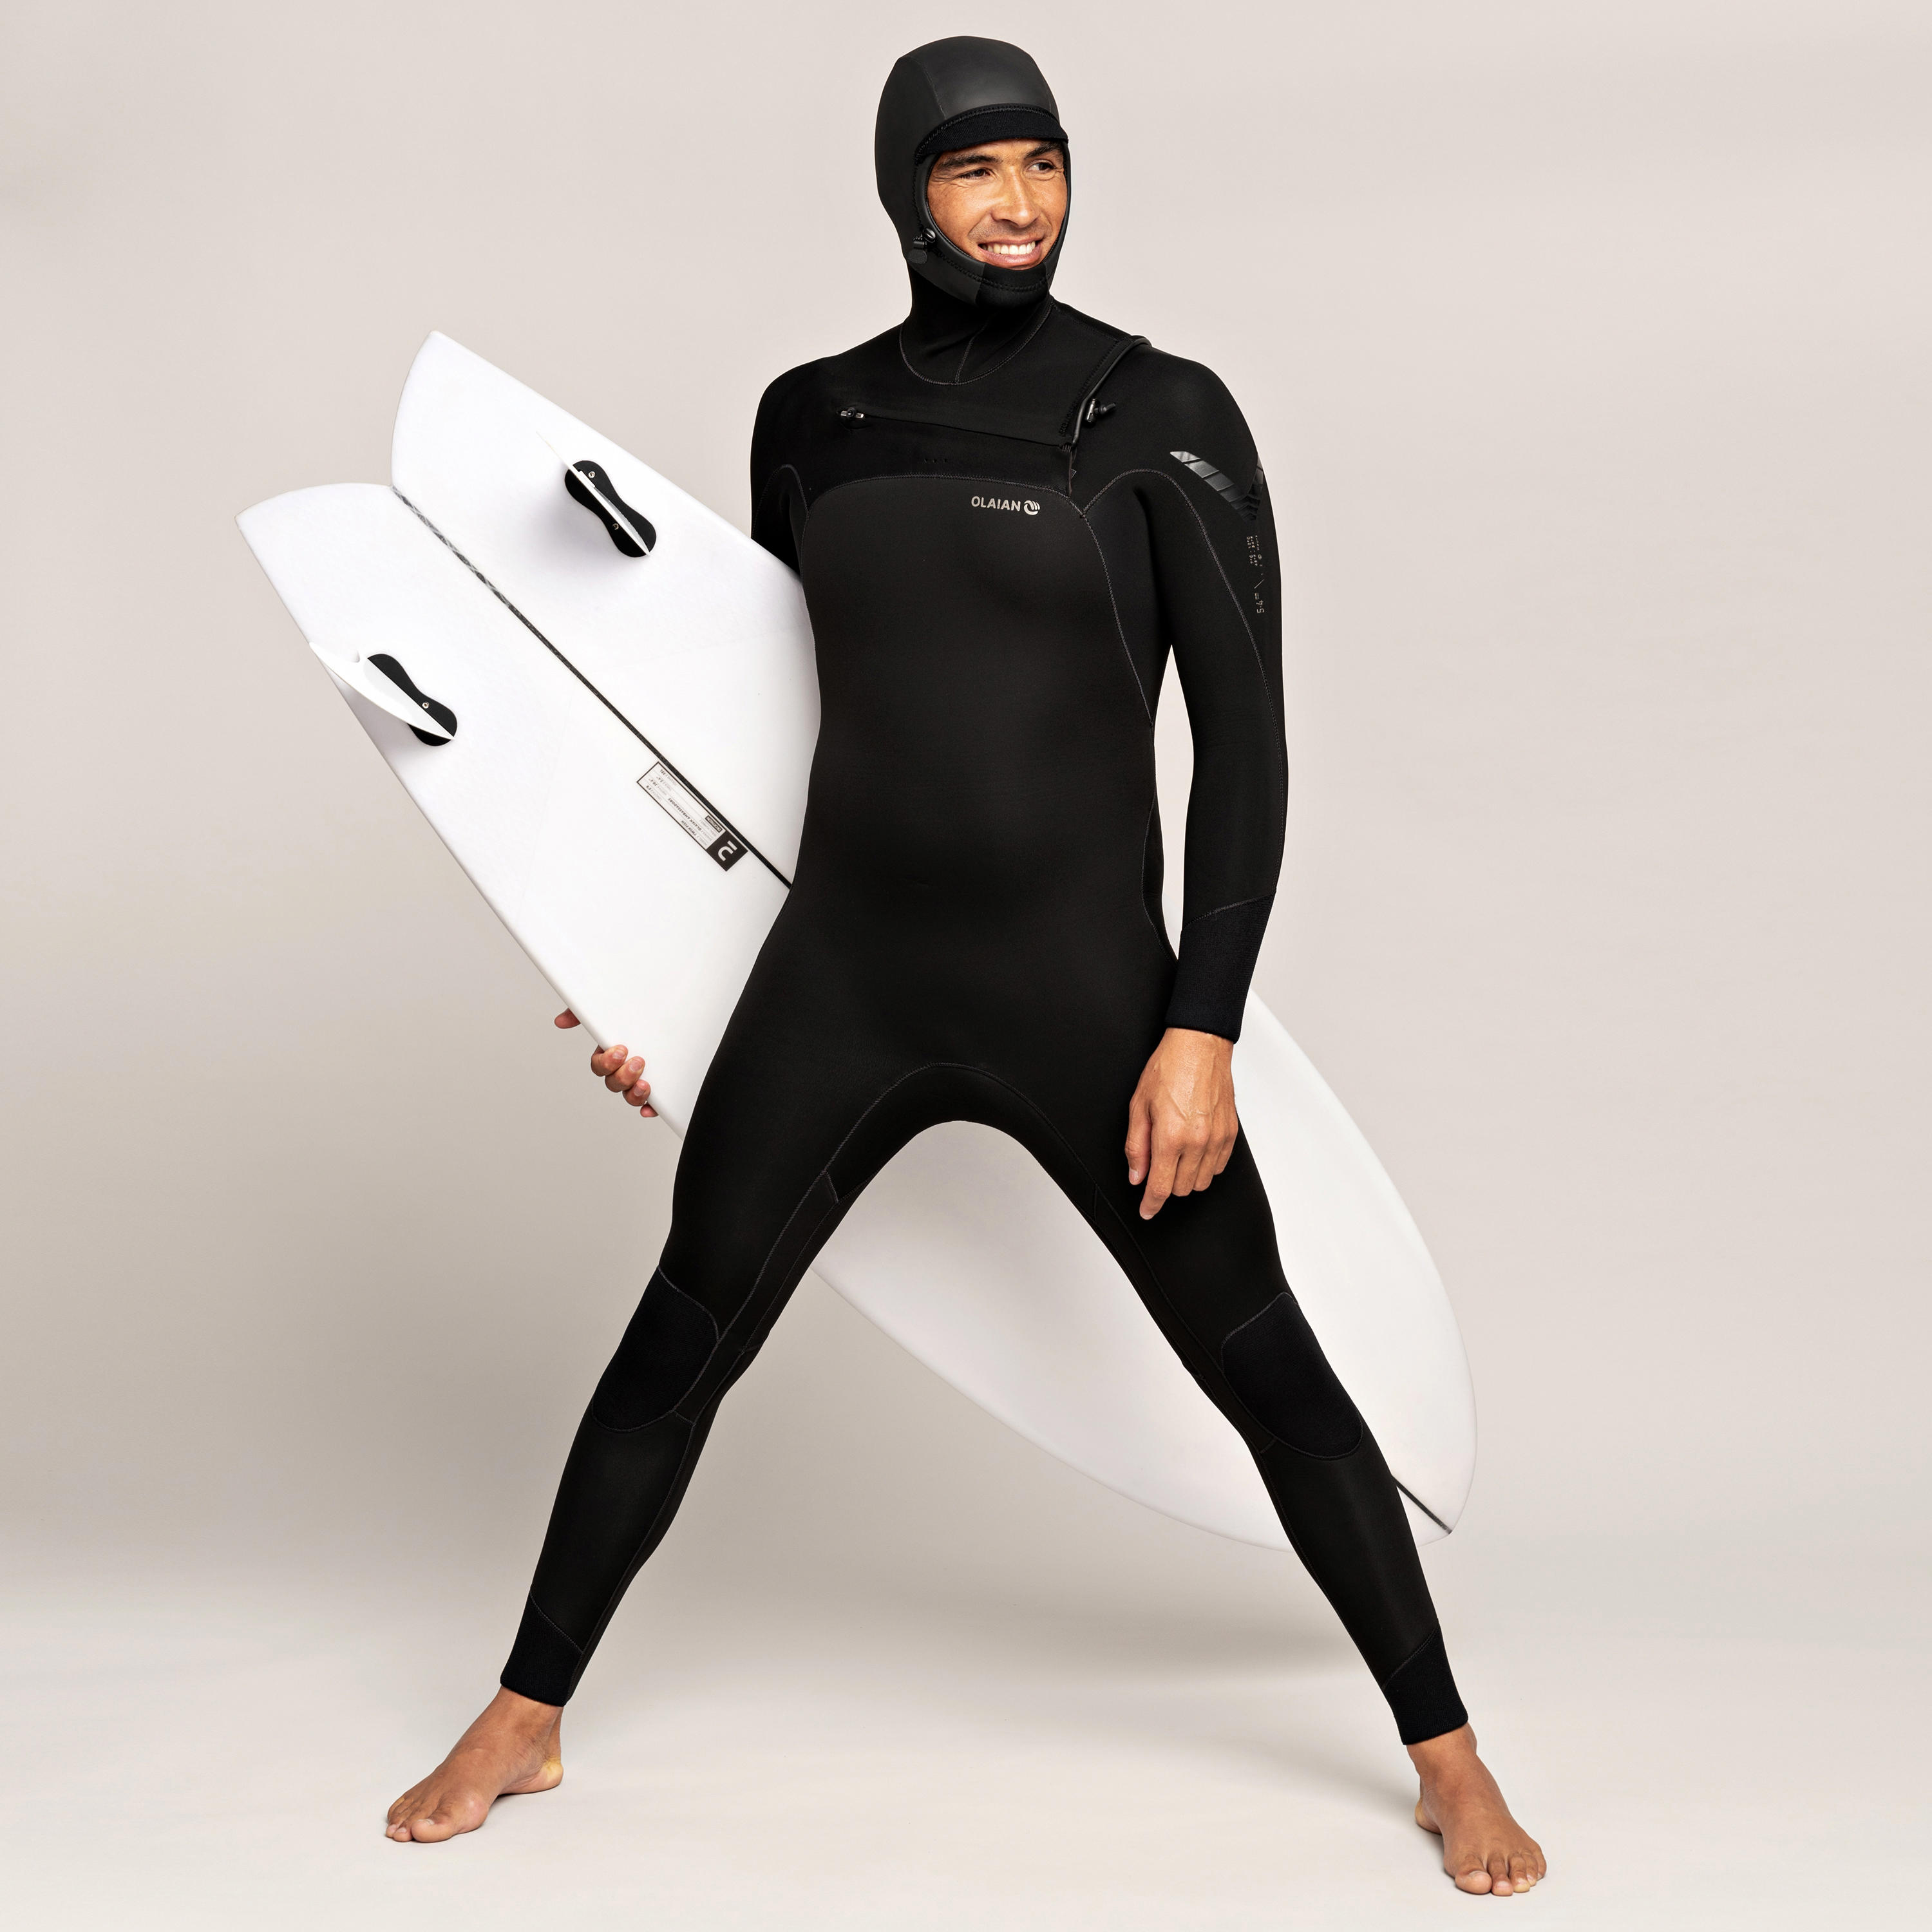 Men's Surfing Wetsuit [FREE SHIPPING]